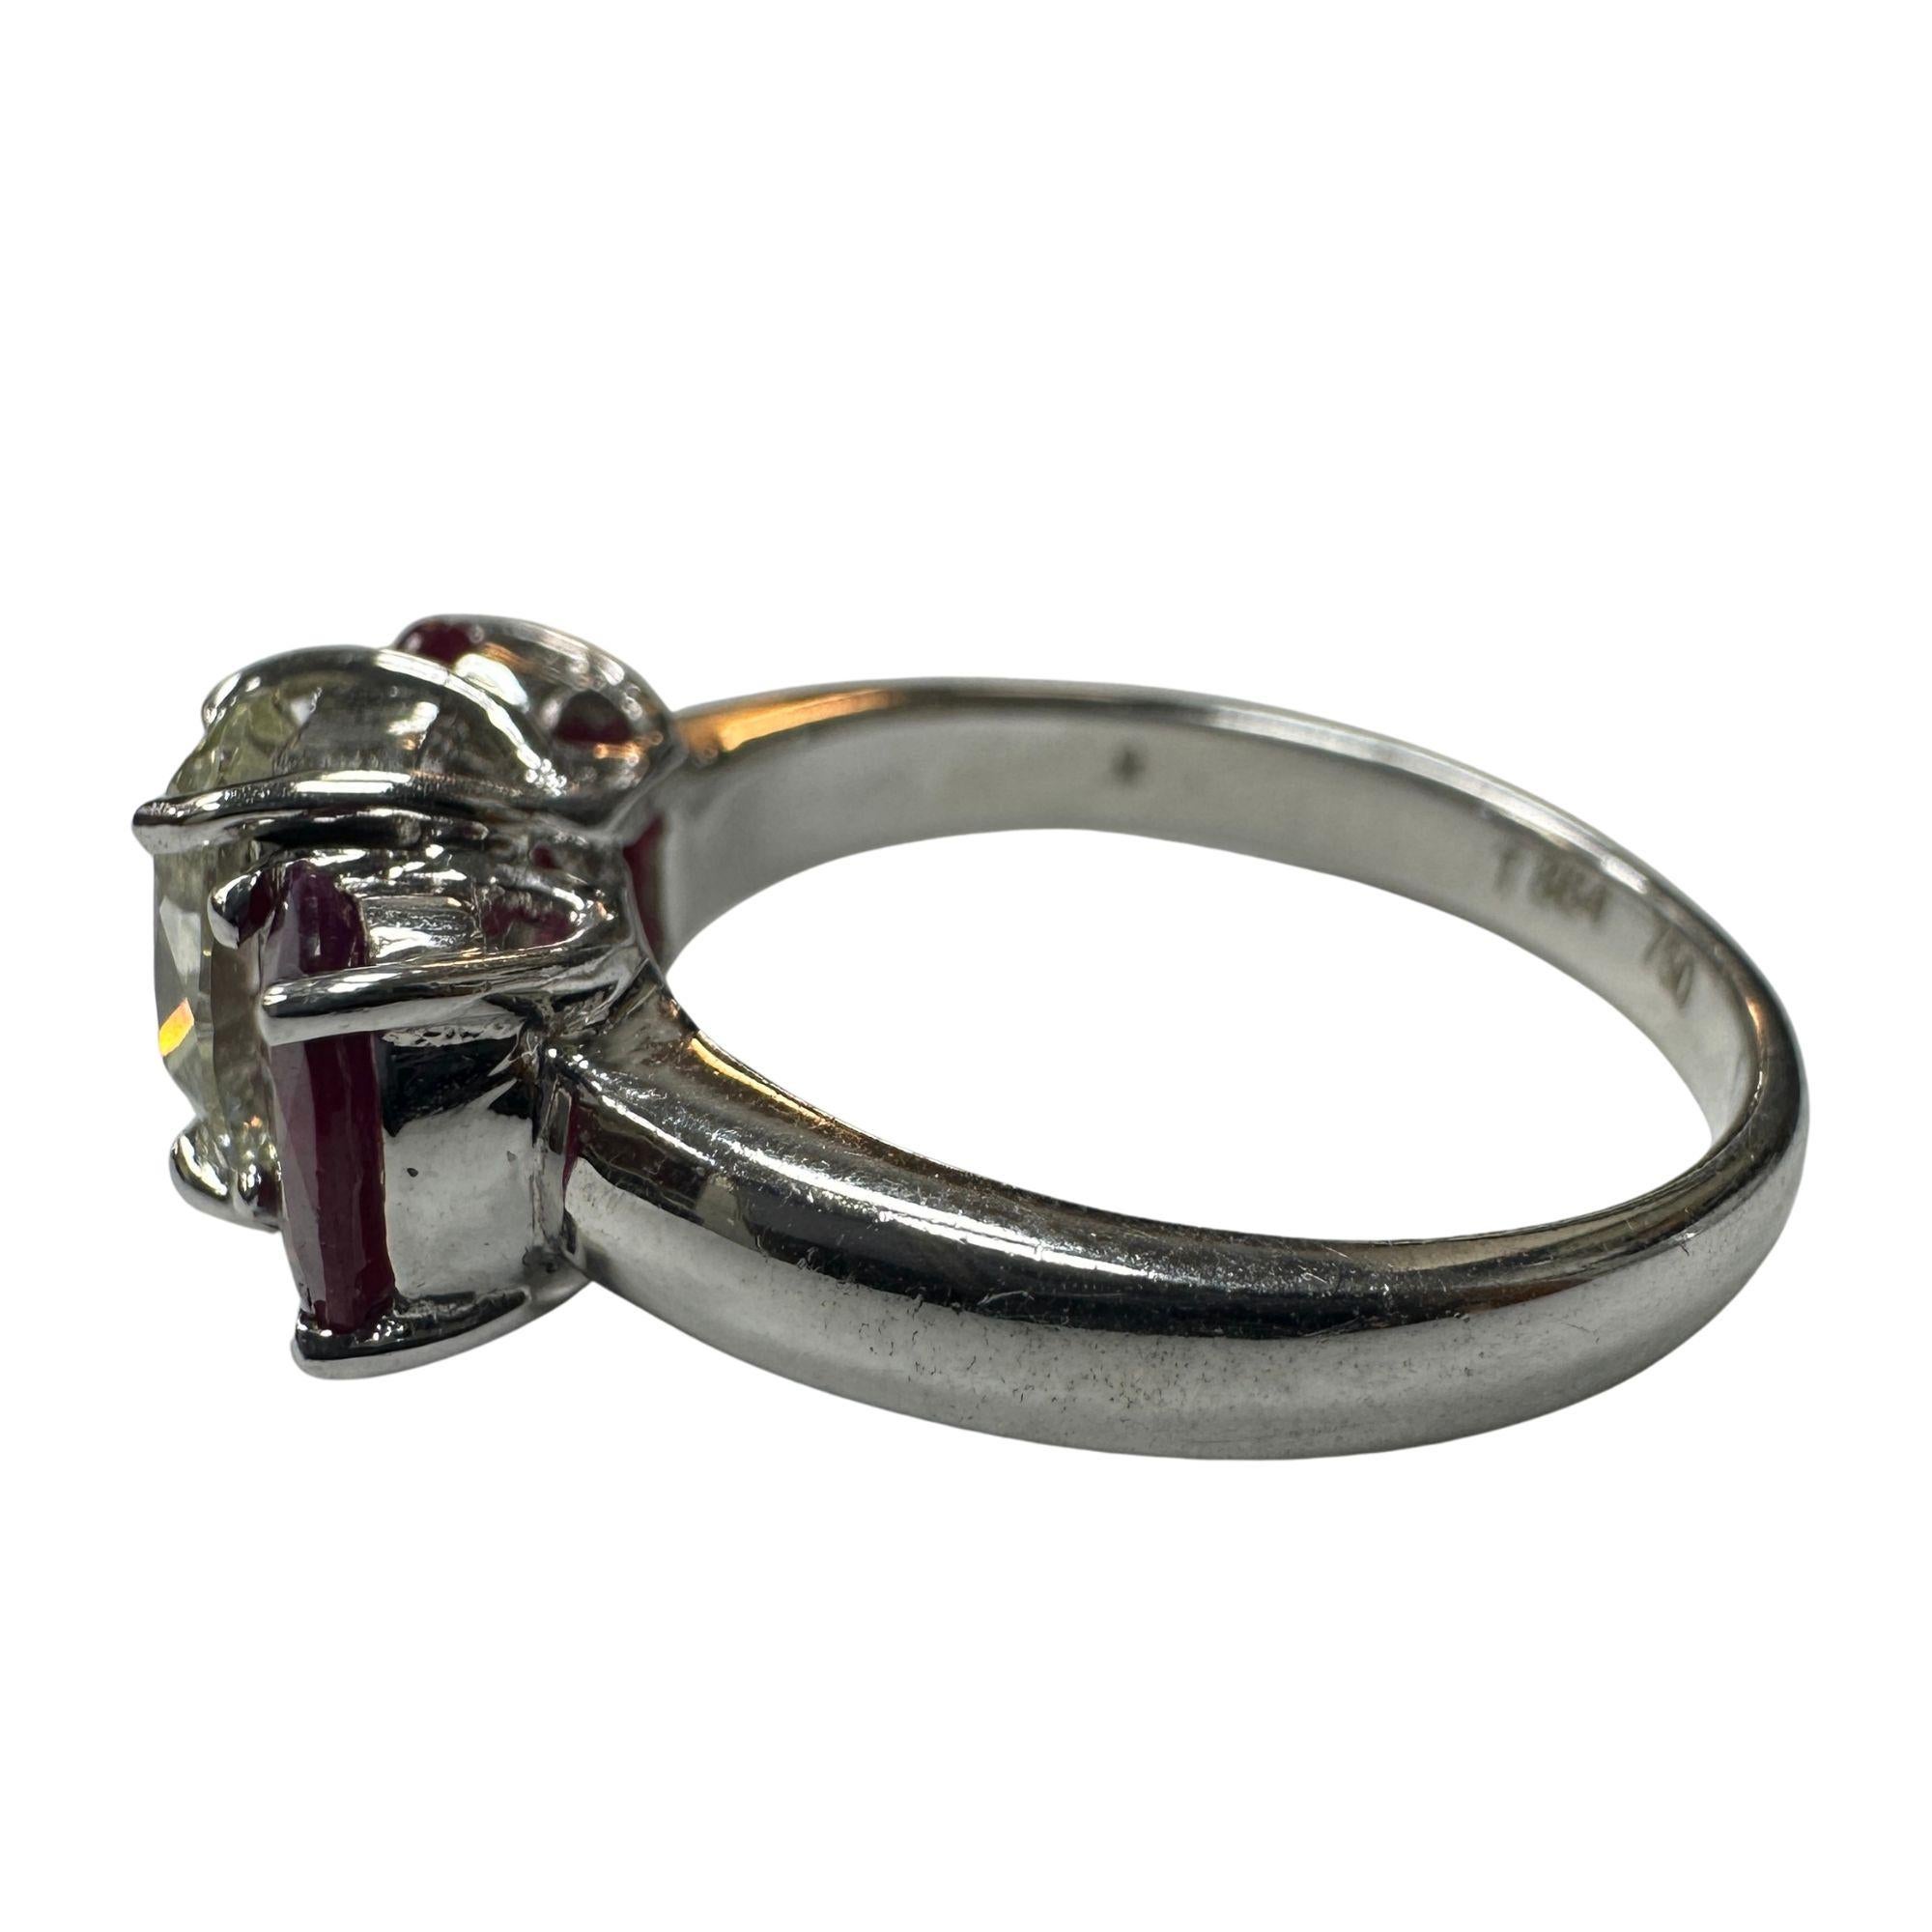 Discover the allure of vintage sophistication with this 18k Diamond and Ruby Ring, presented in very good condition with minor surface wear, a testament to its rich history.

Crafted in 18k white gold and weighing 5.7 grams, this ring is a true